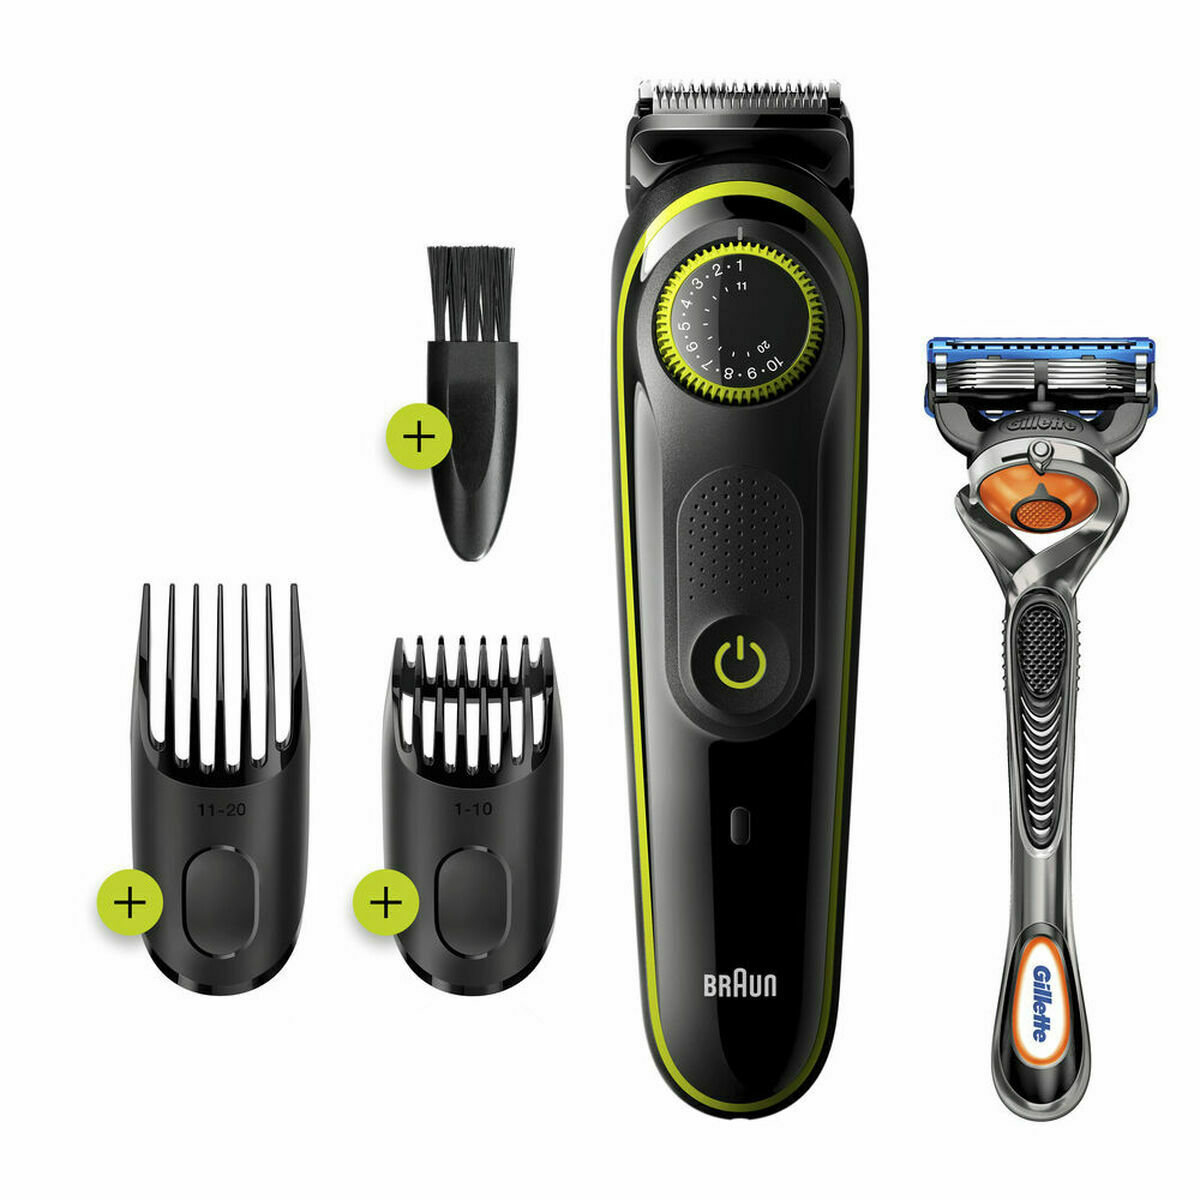 Hair clippers/Shaver Braun BT3241 (Refurbished A)